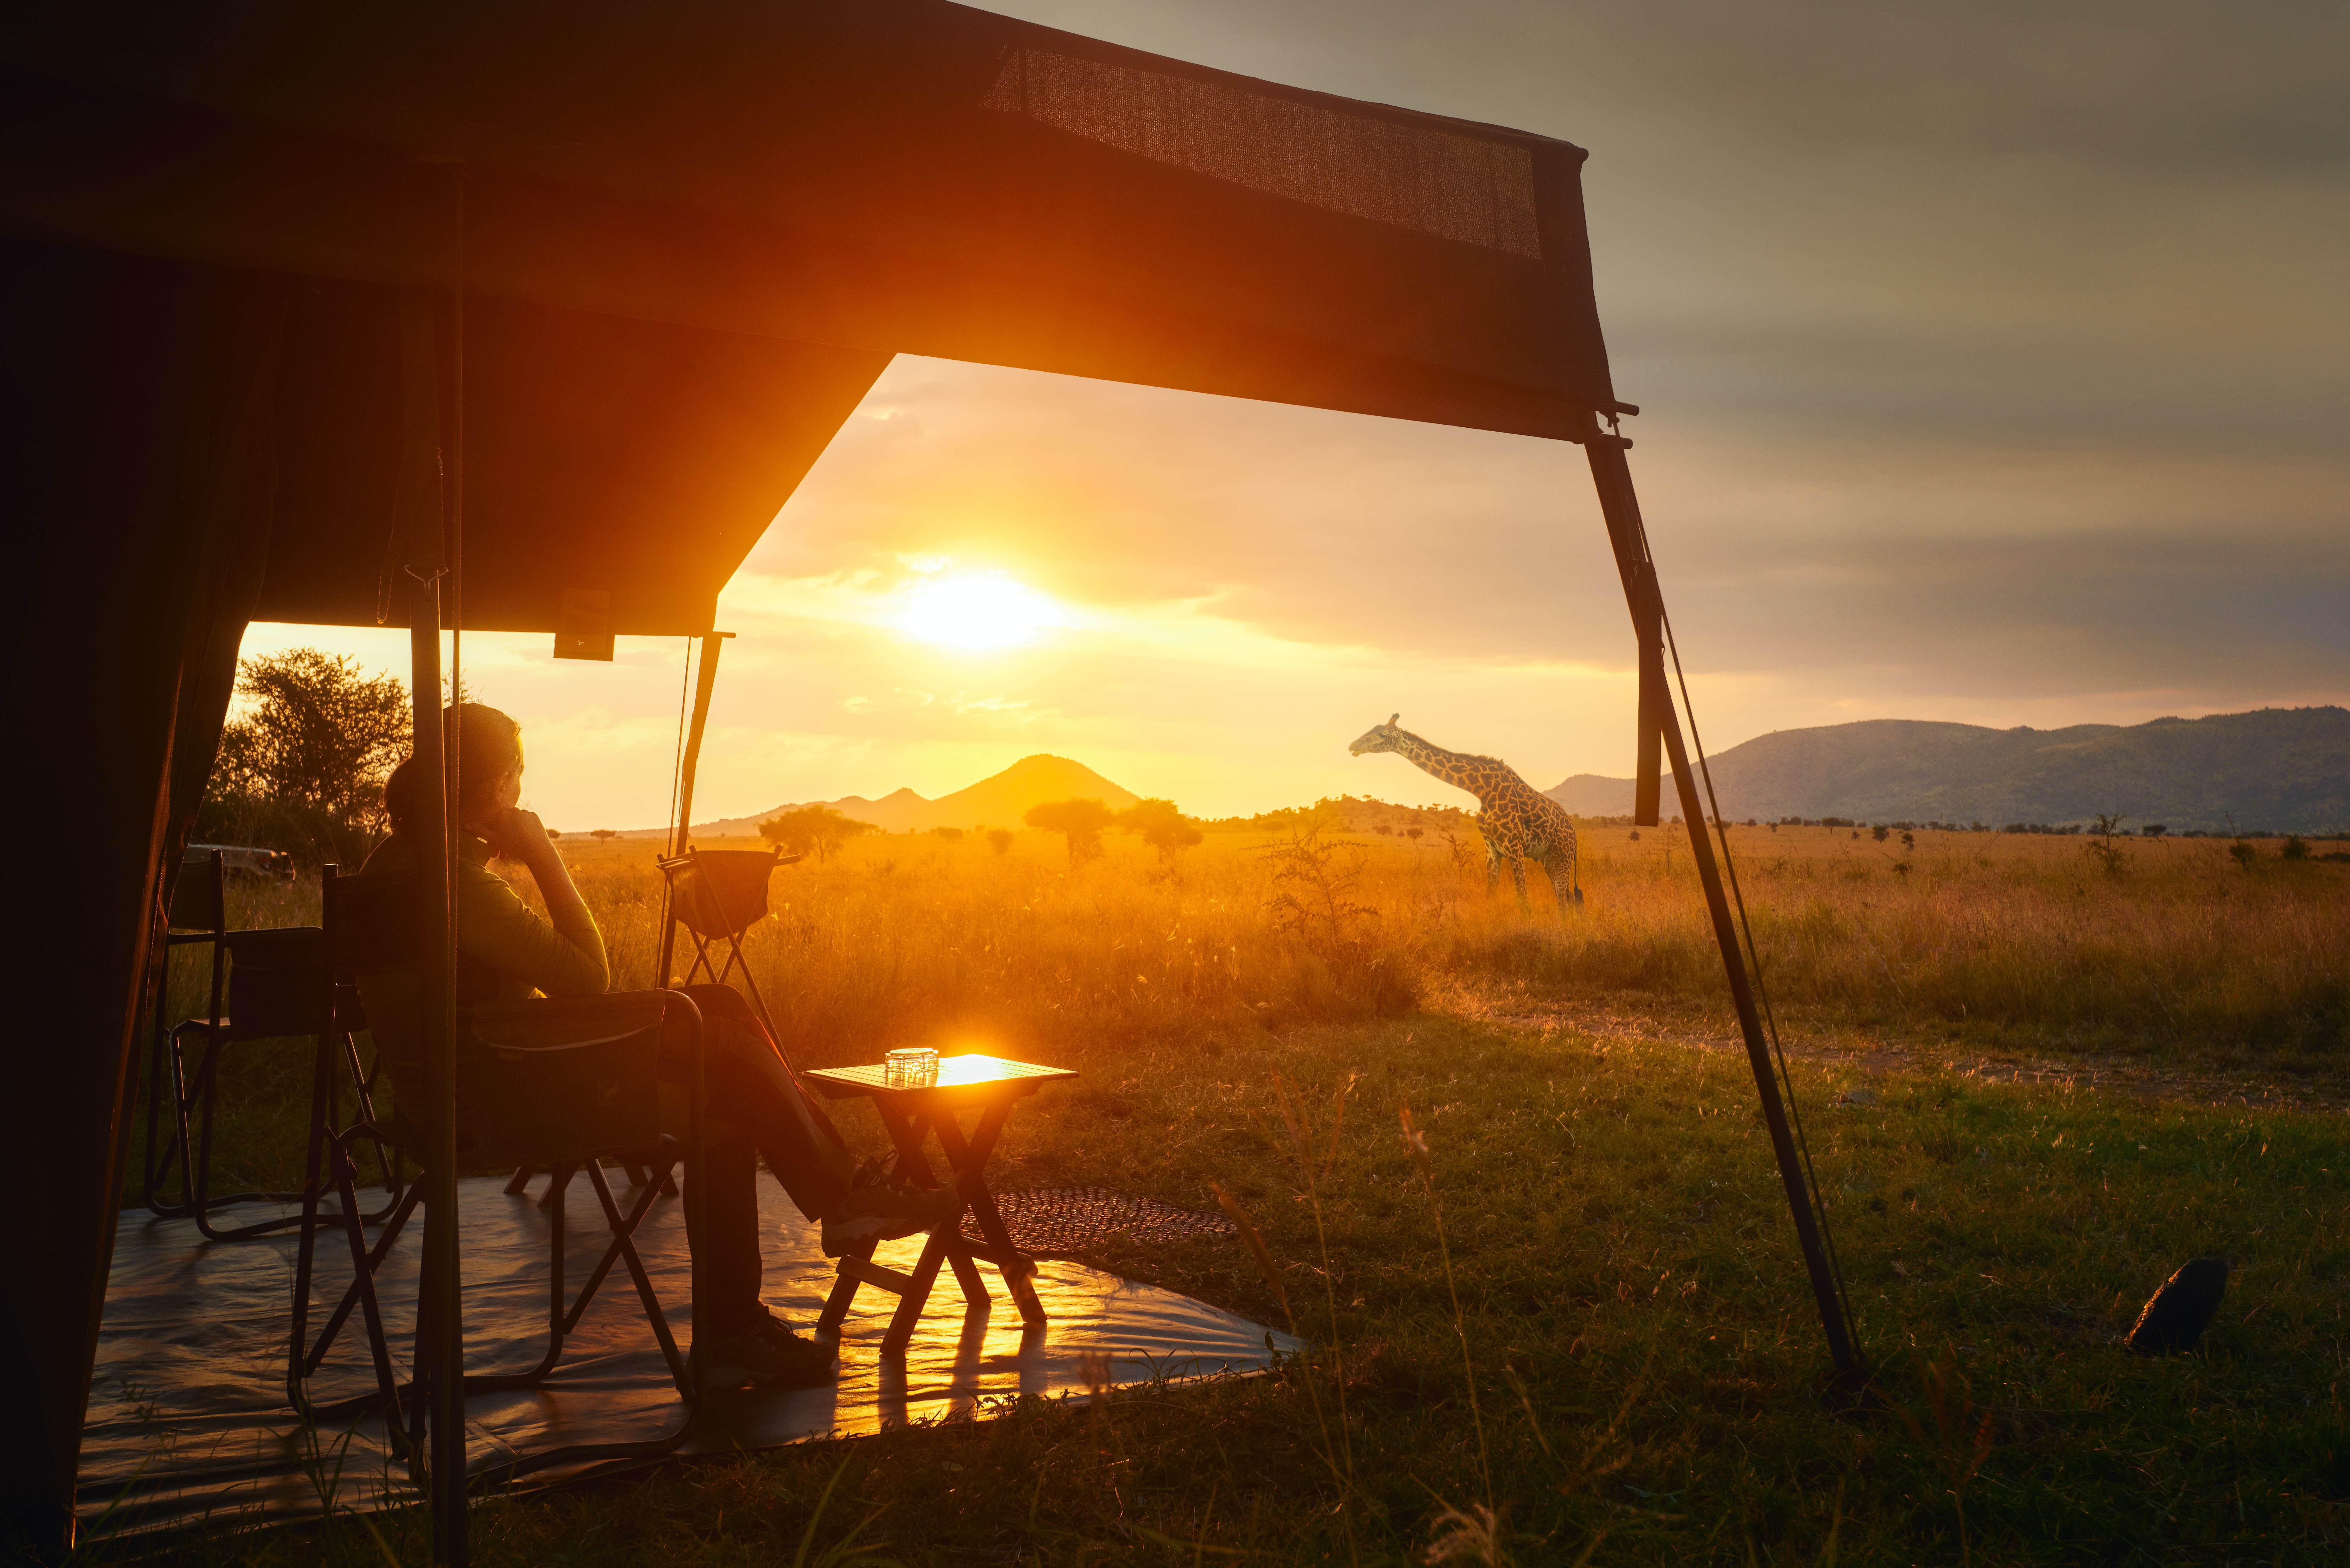 A woman relaxing at a safari lodge with a giraffe in the background | Source: Shutterstock